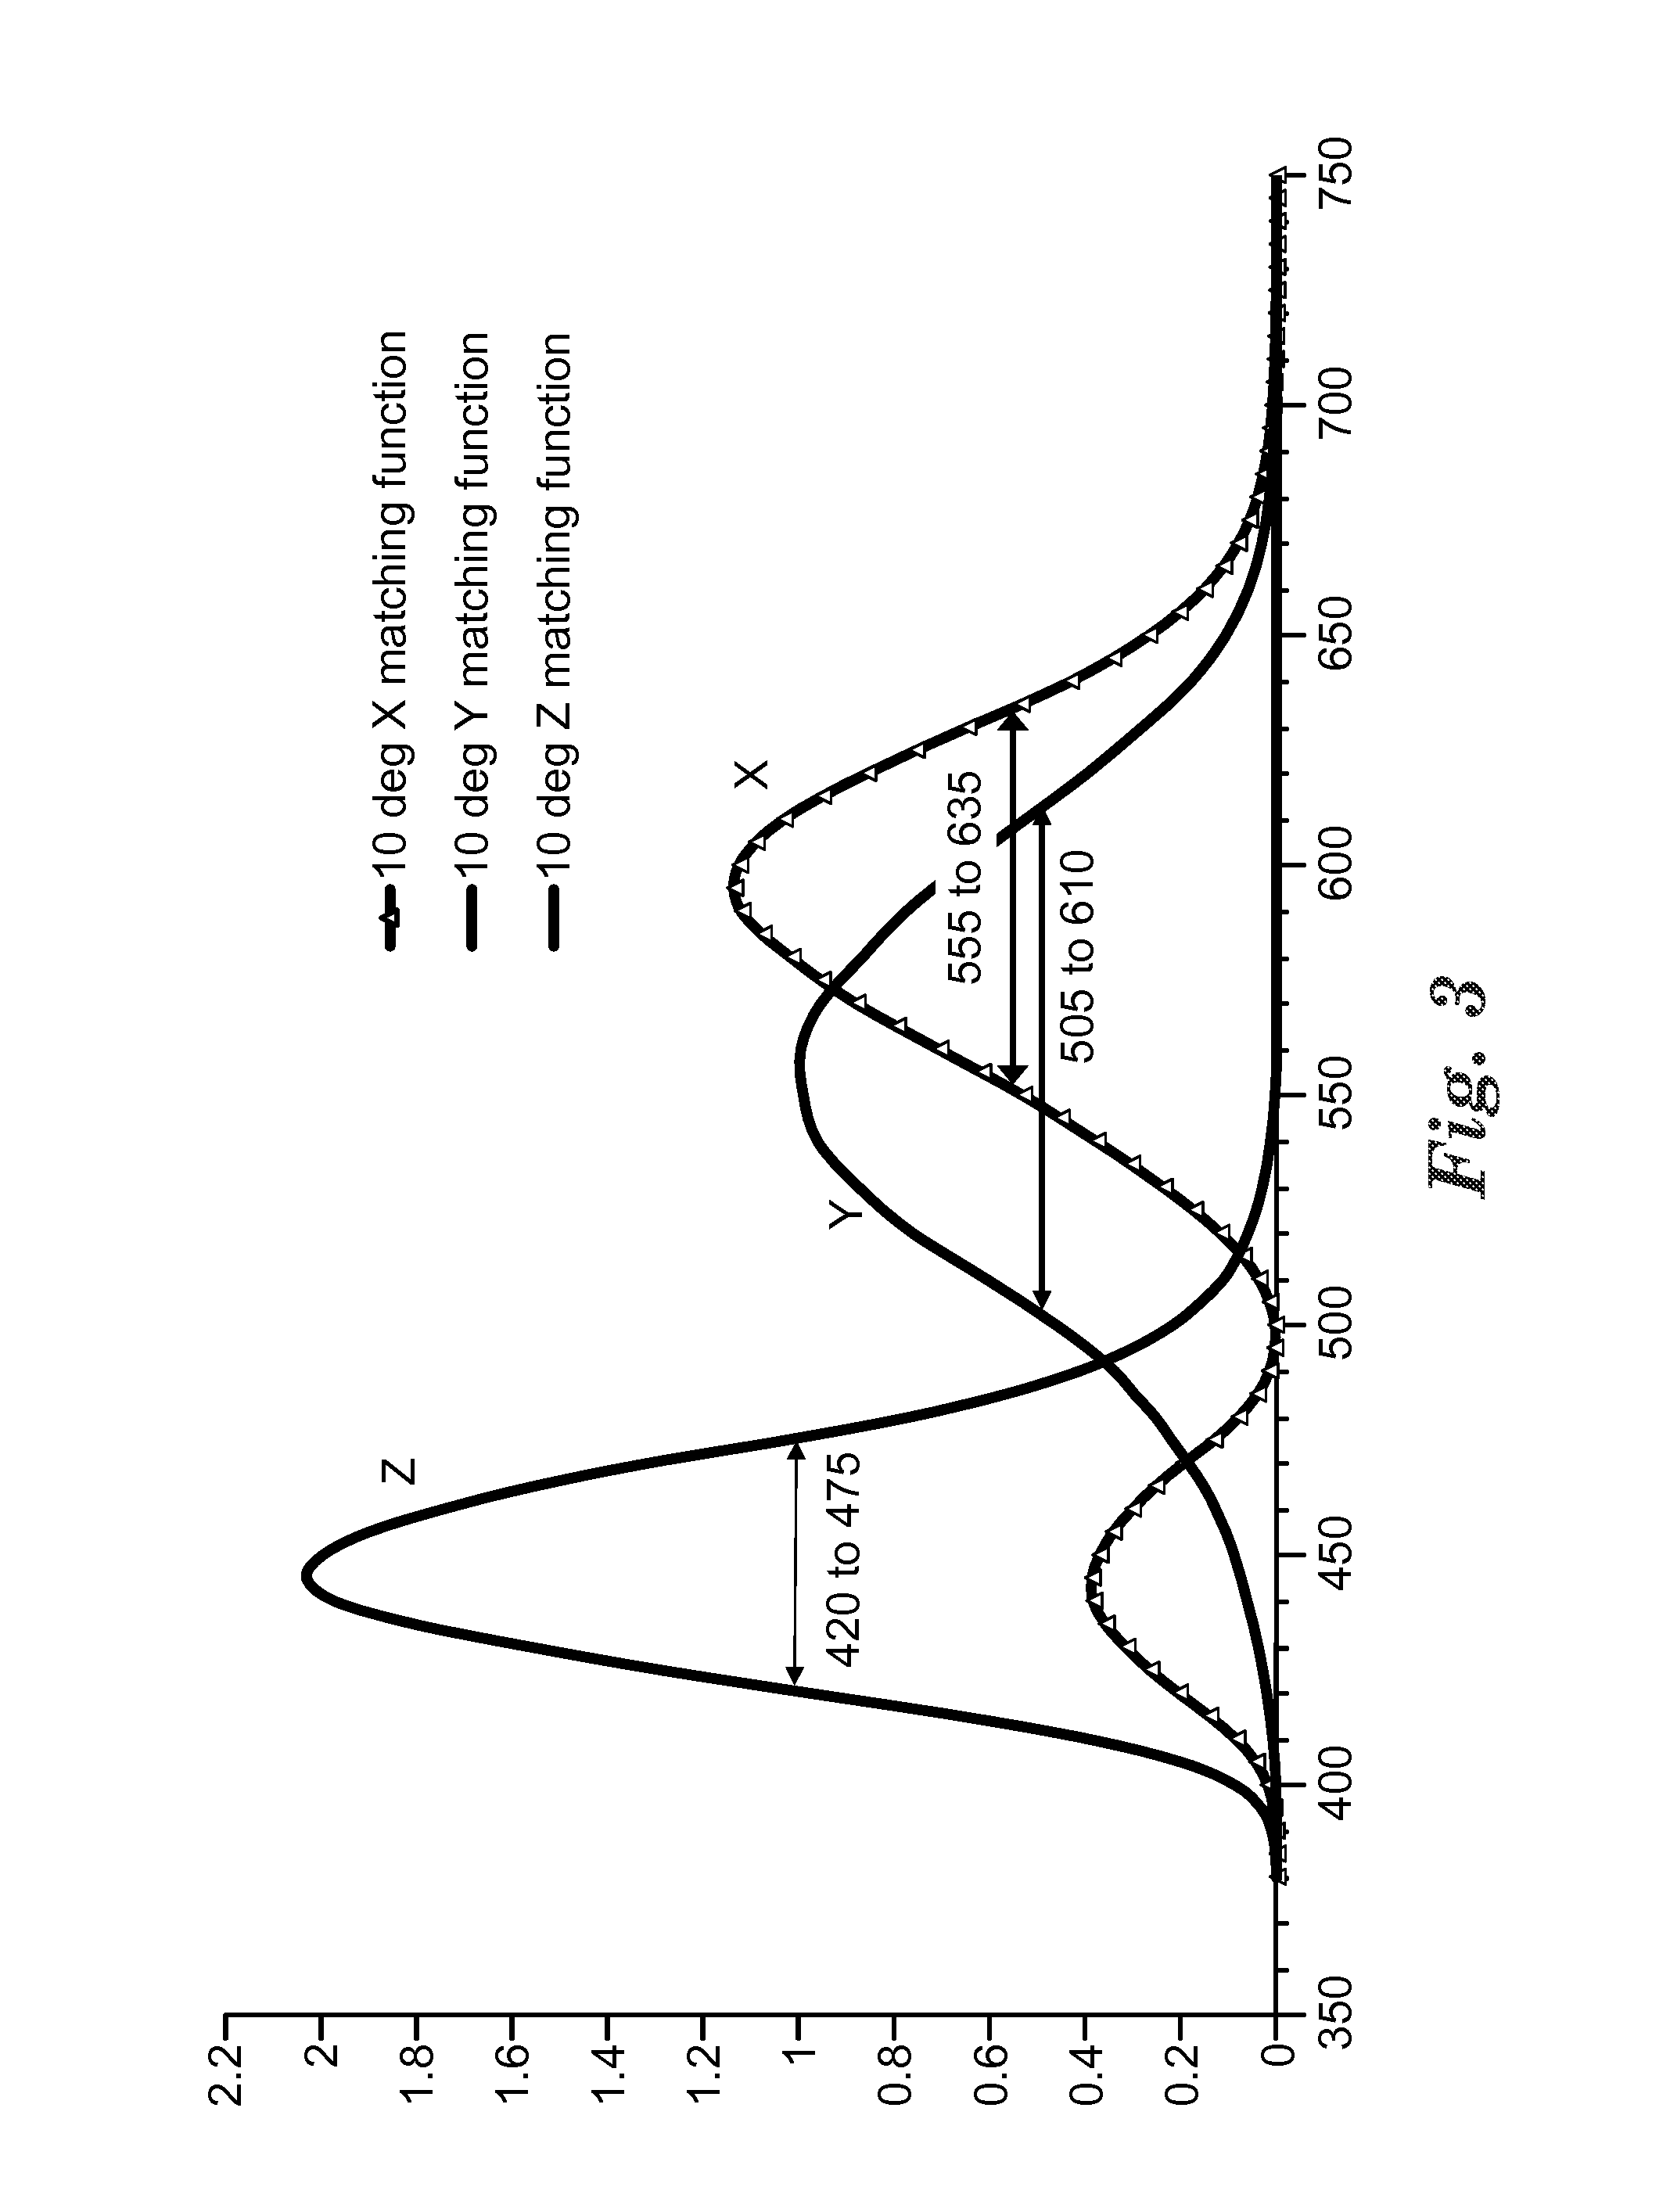 Illumination systems with sloped transmission spectrum front reflector